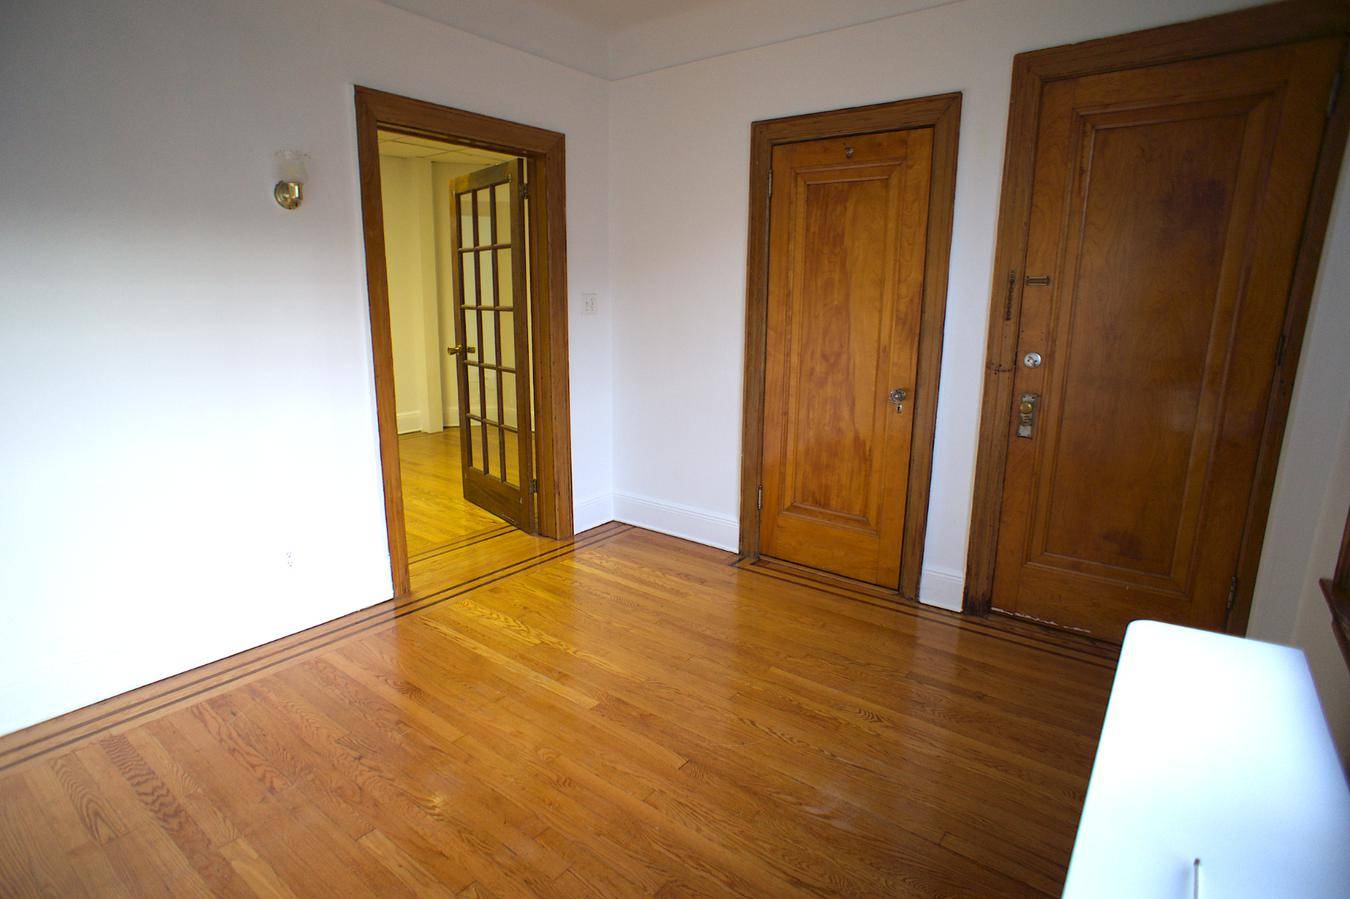 Price reduction ! This 2 bedroom unit located in prime Astoria neighborhood is a steal !